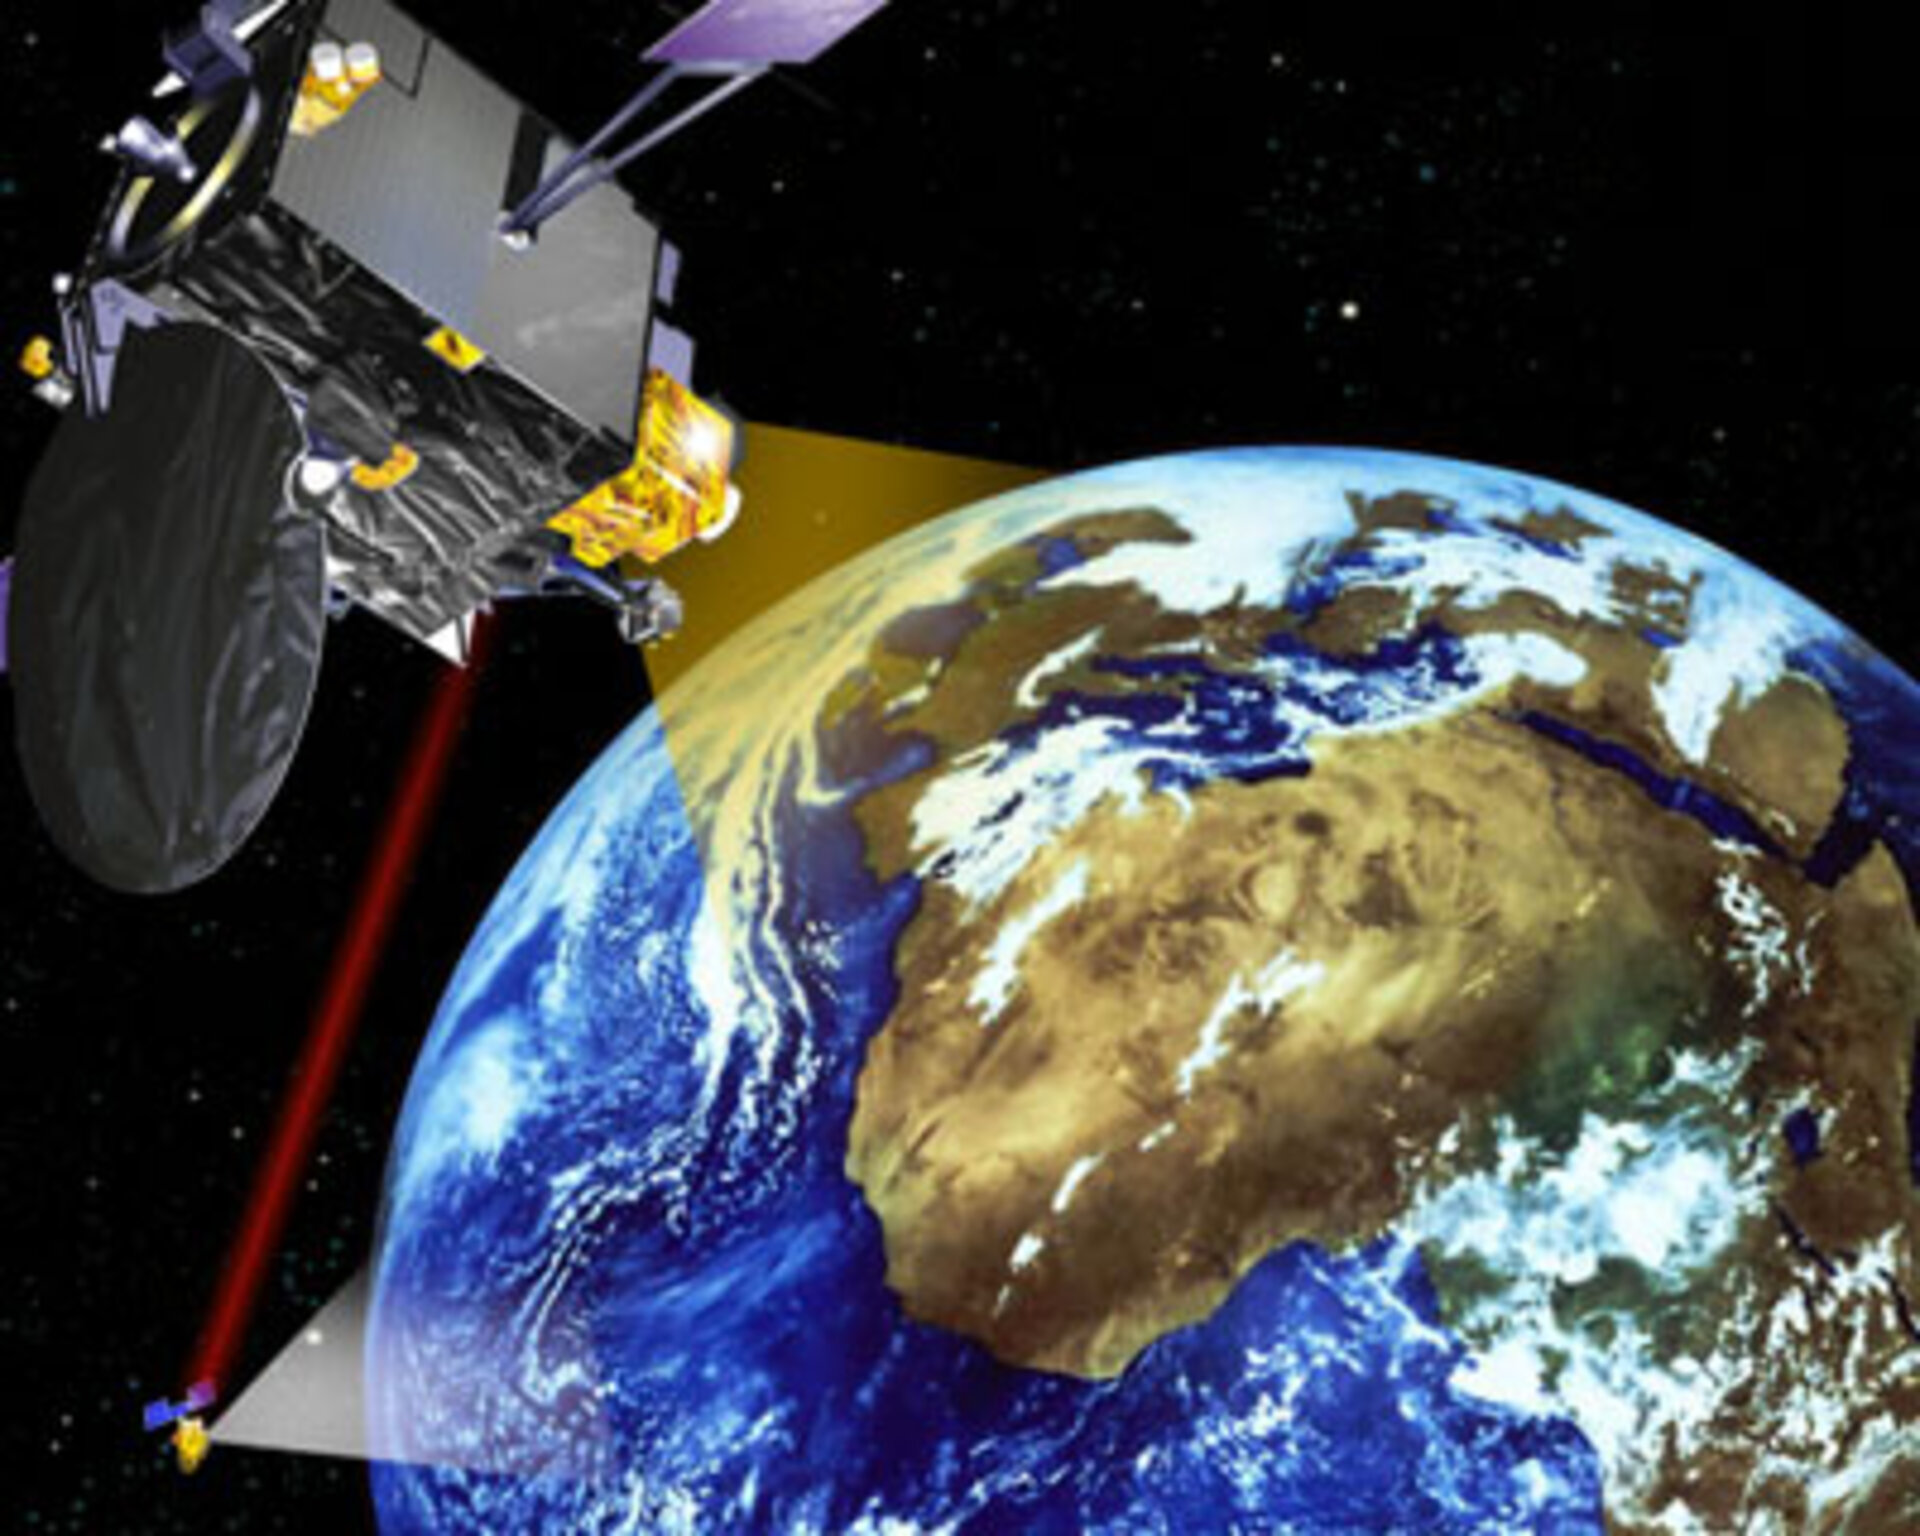 Satellites can widen access to electronic communication services